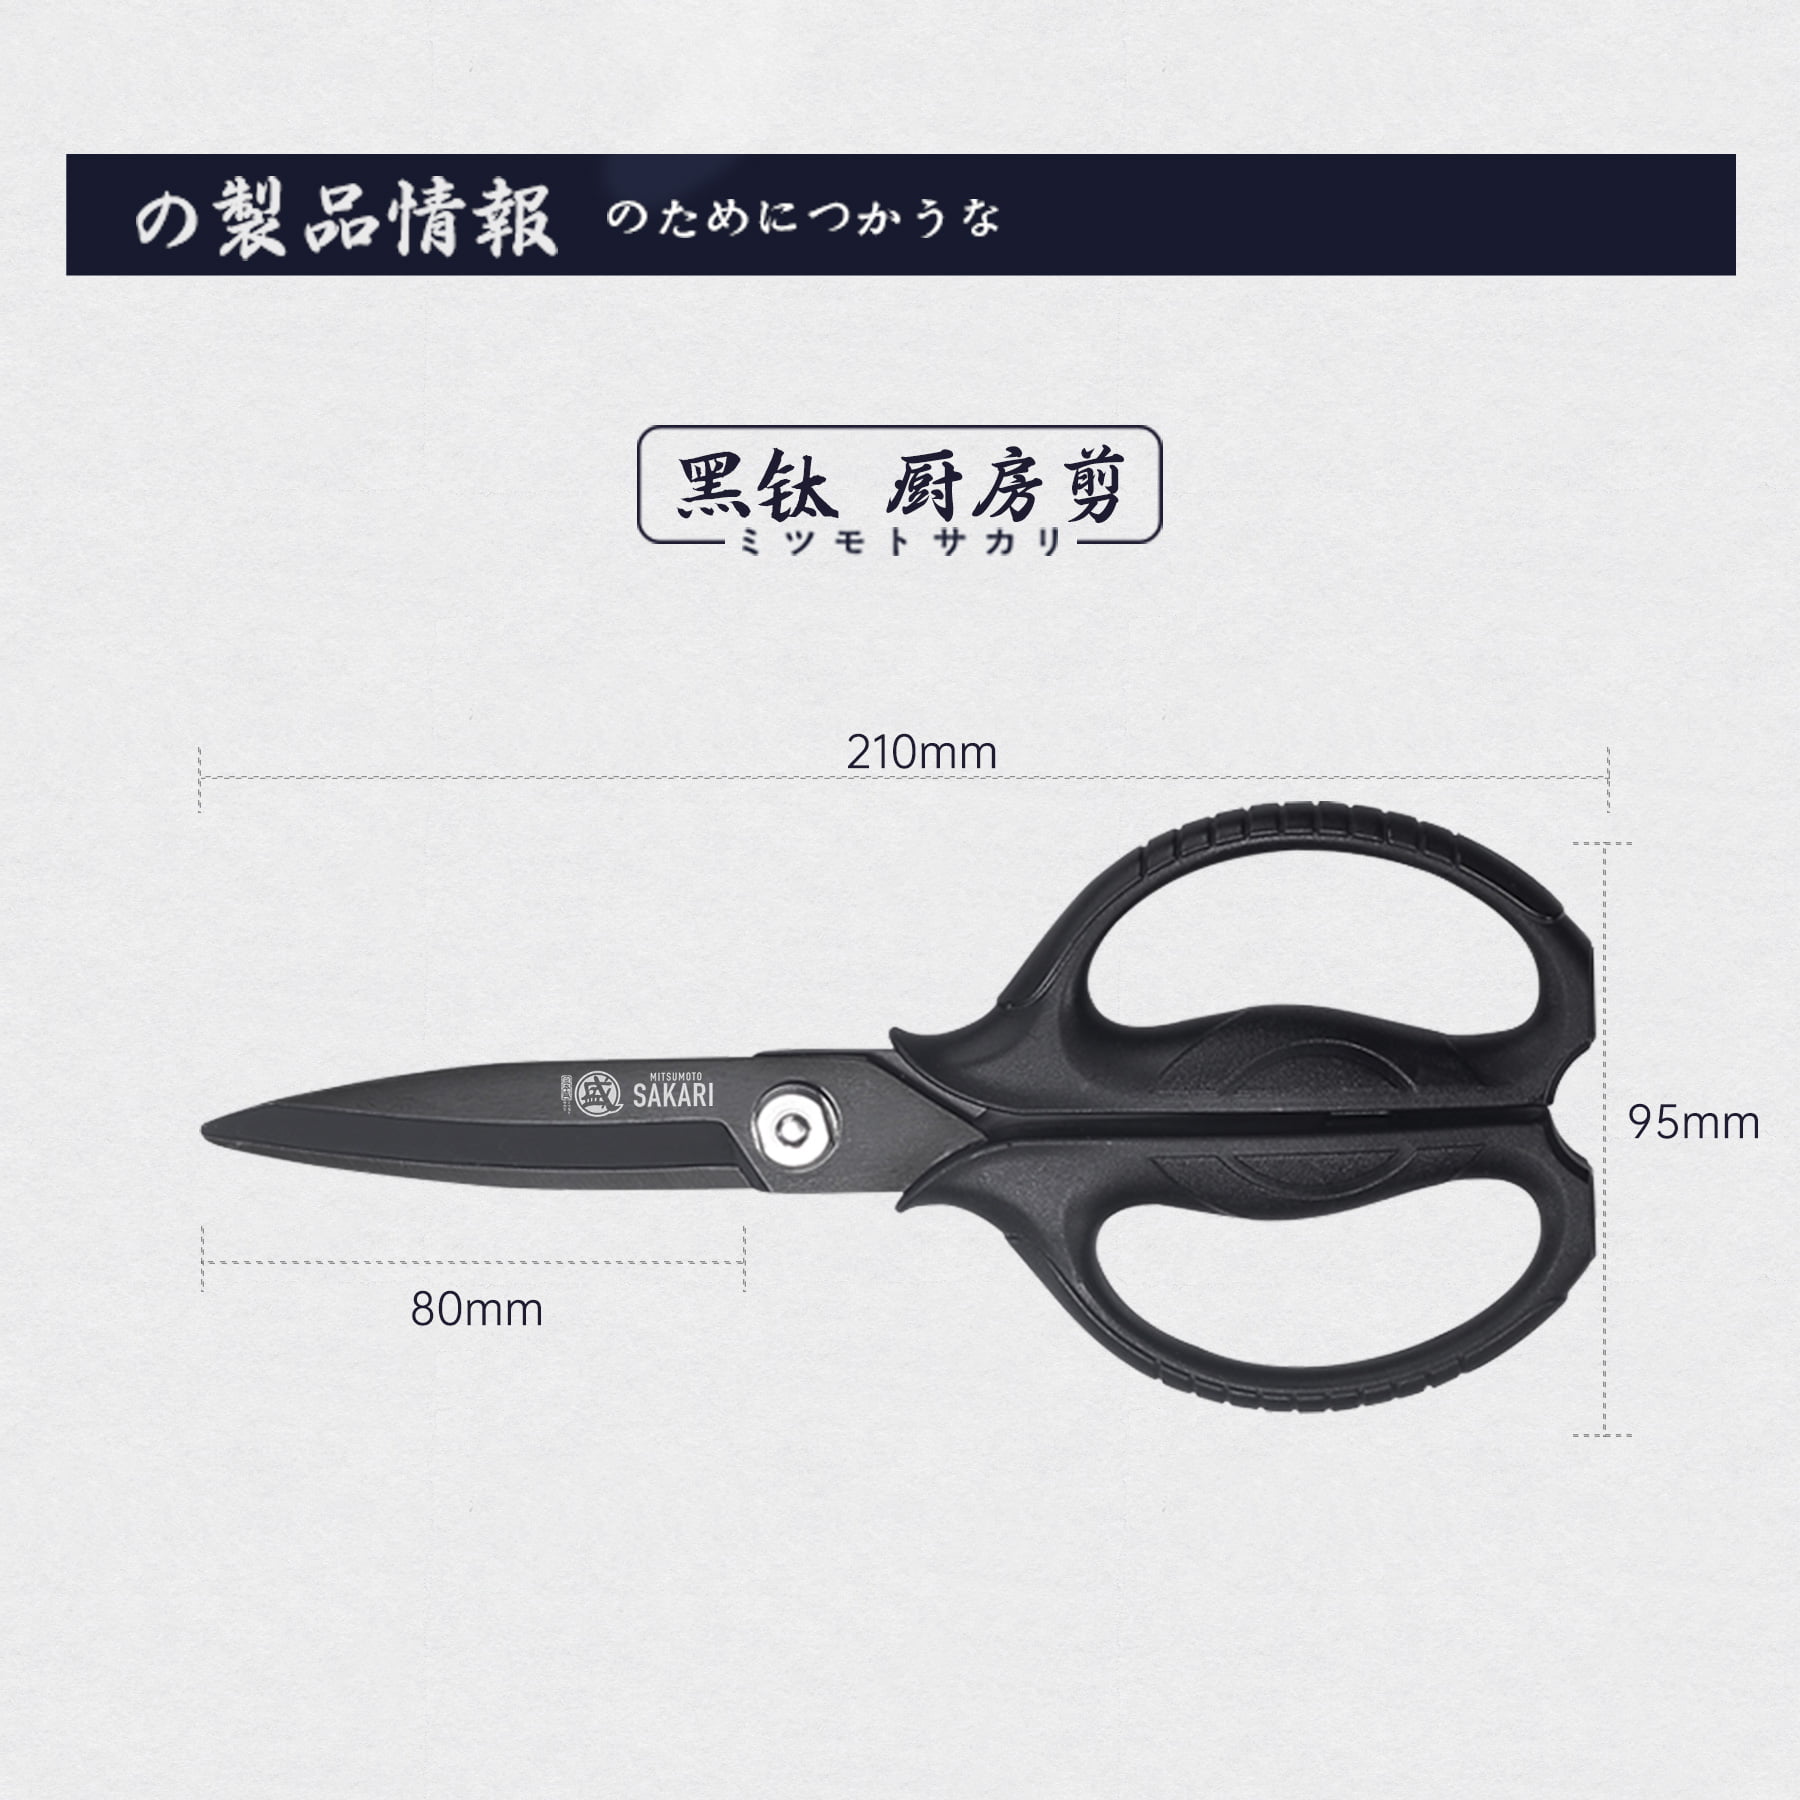 CANARY Japanese Kitchen Scissors All Purpose Heavy Duty 8.2 Matte Black,  Made in JAPAN, Dishwasher Safe Come Apart Blade, Multipurpose Kitchen